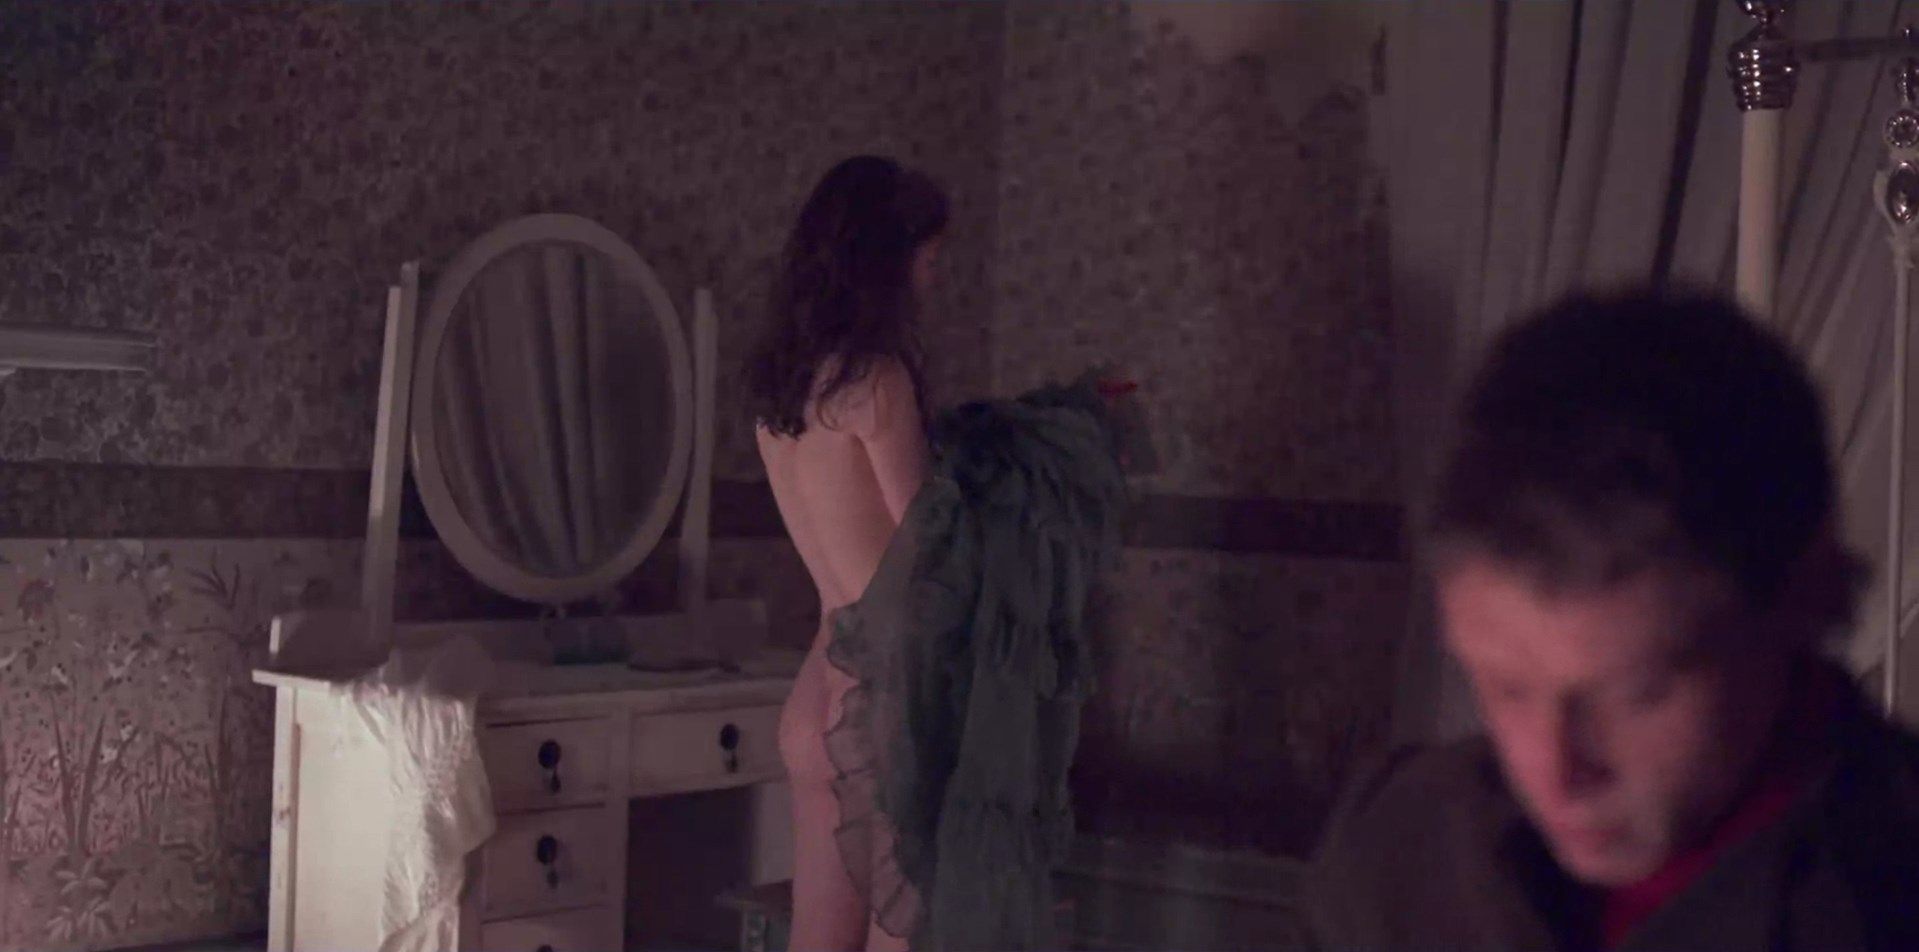 Actress Thomasin McKenzie (19) makes her nude debut in the scene from her n...